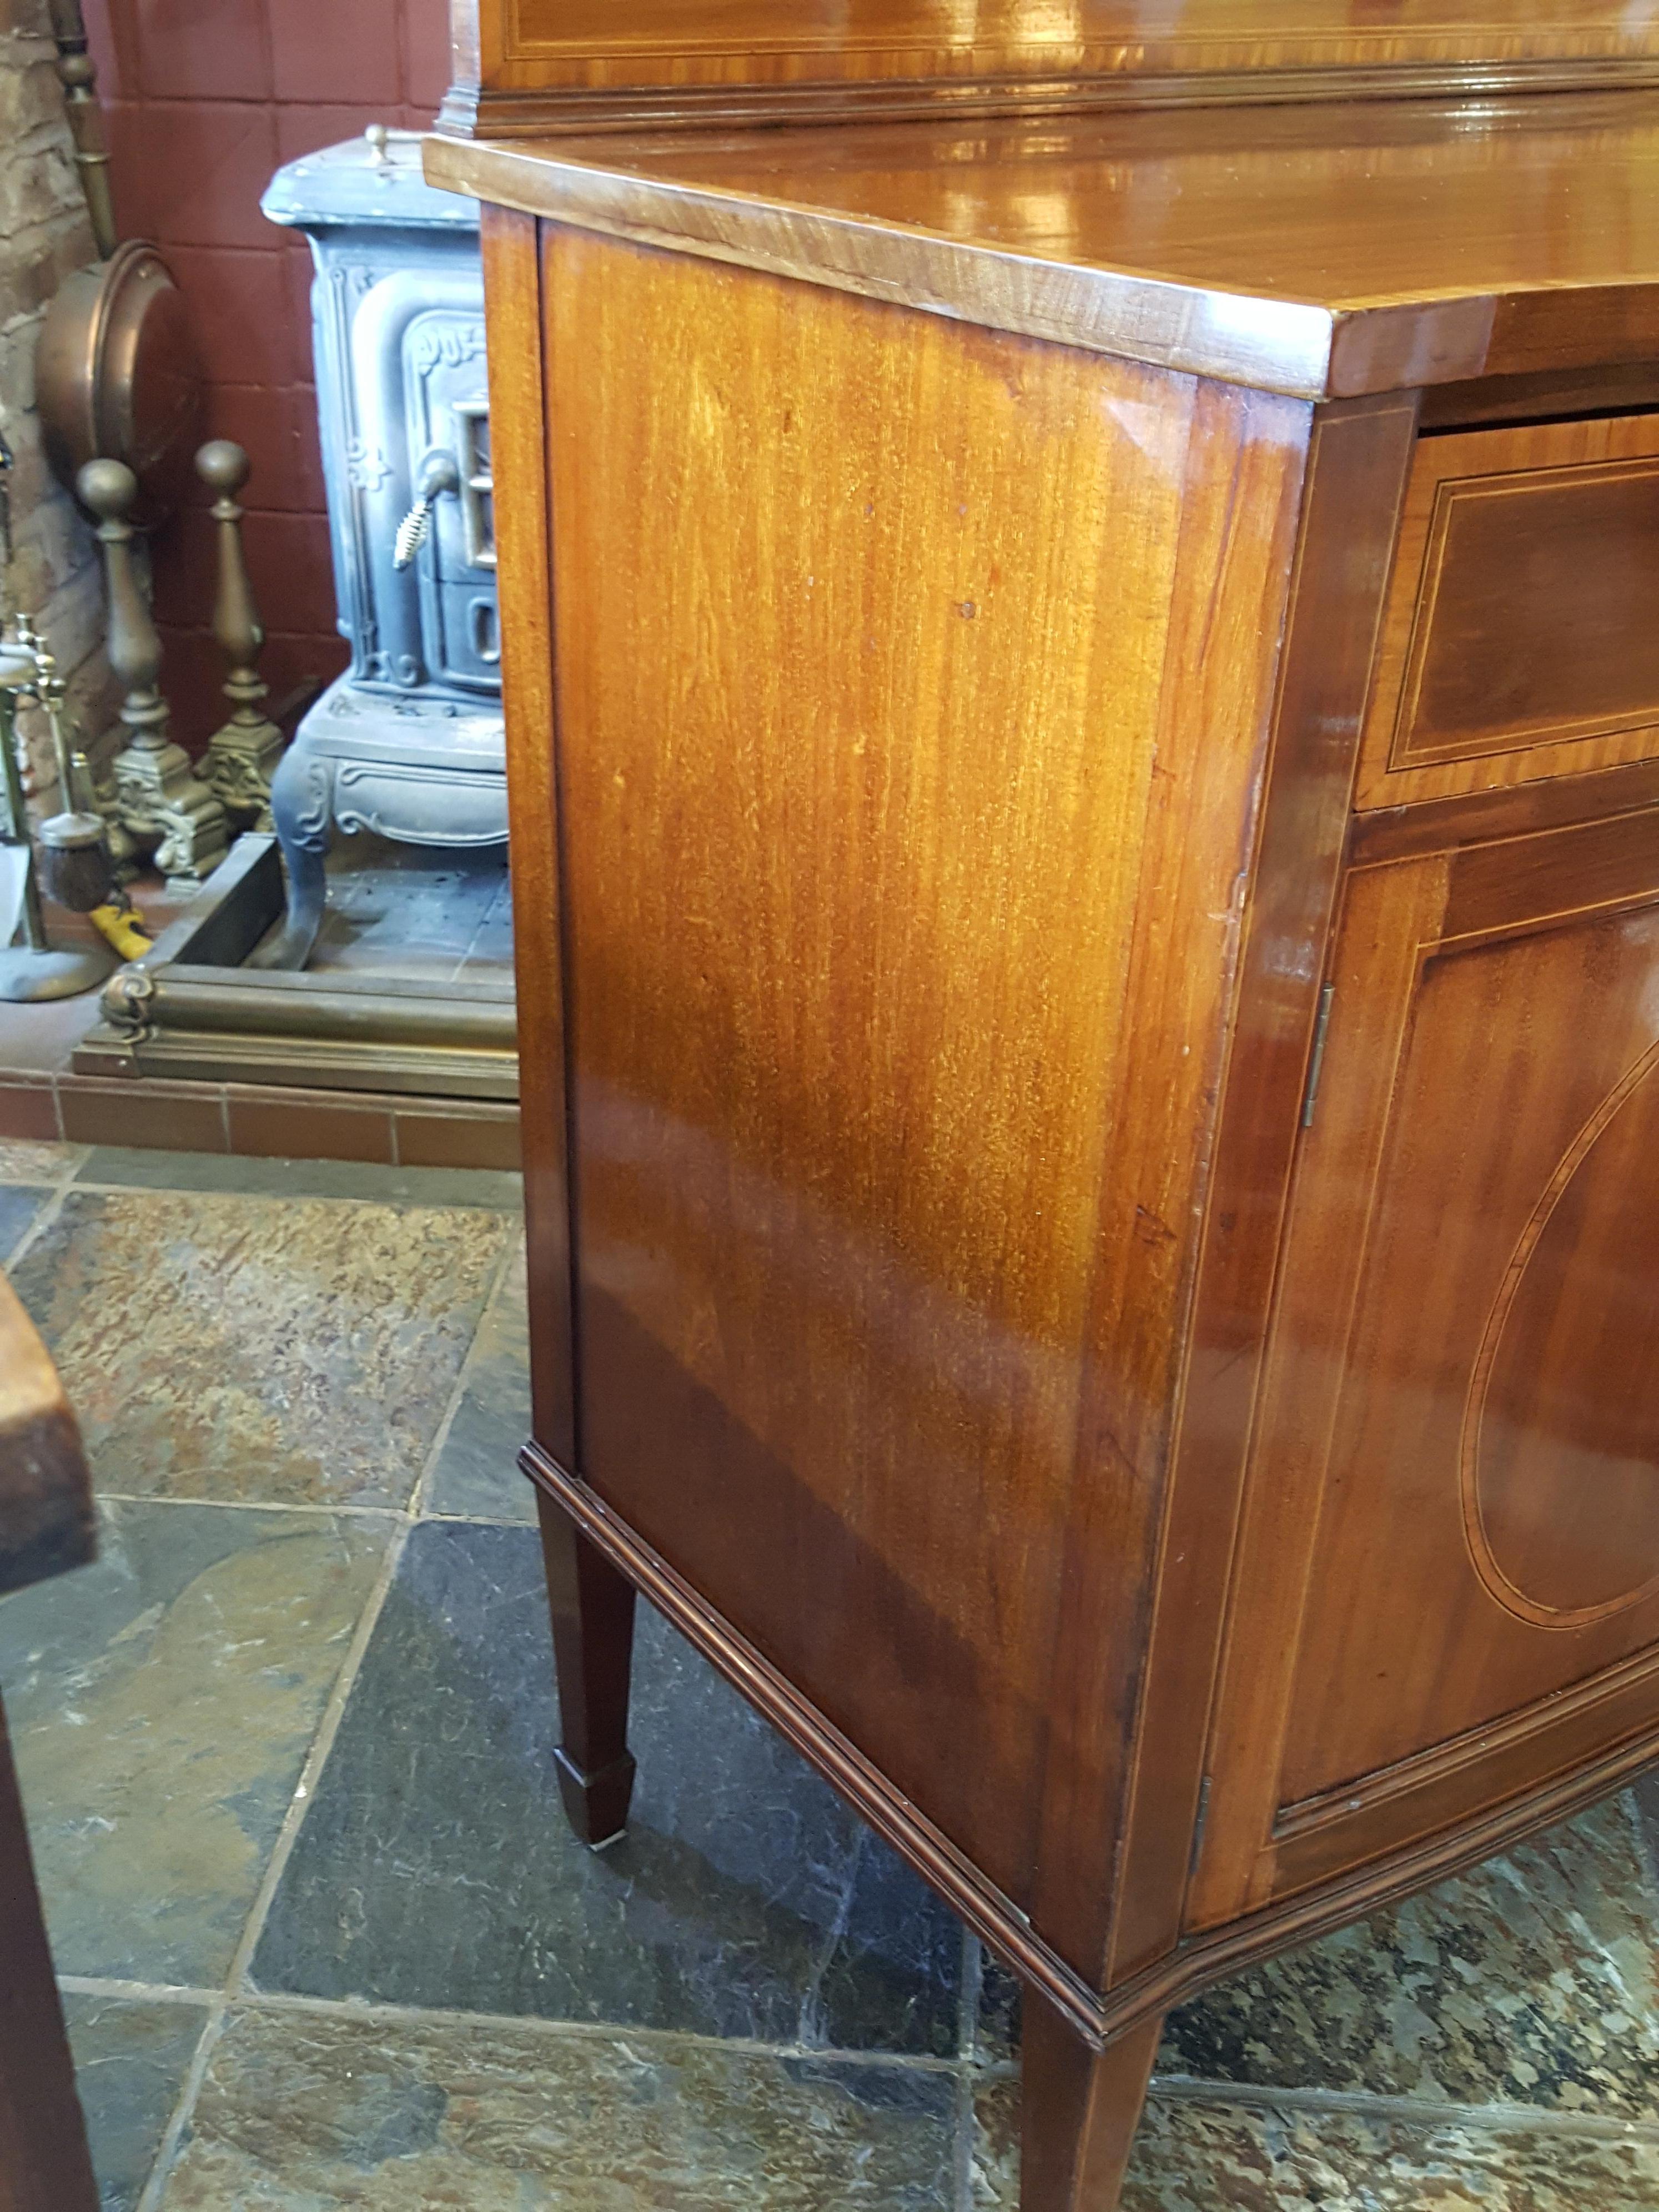 Edwardian Mahogany Drinks Cabinet In Good Condition For Sale In Altrincham, Cheshire